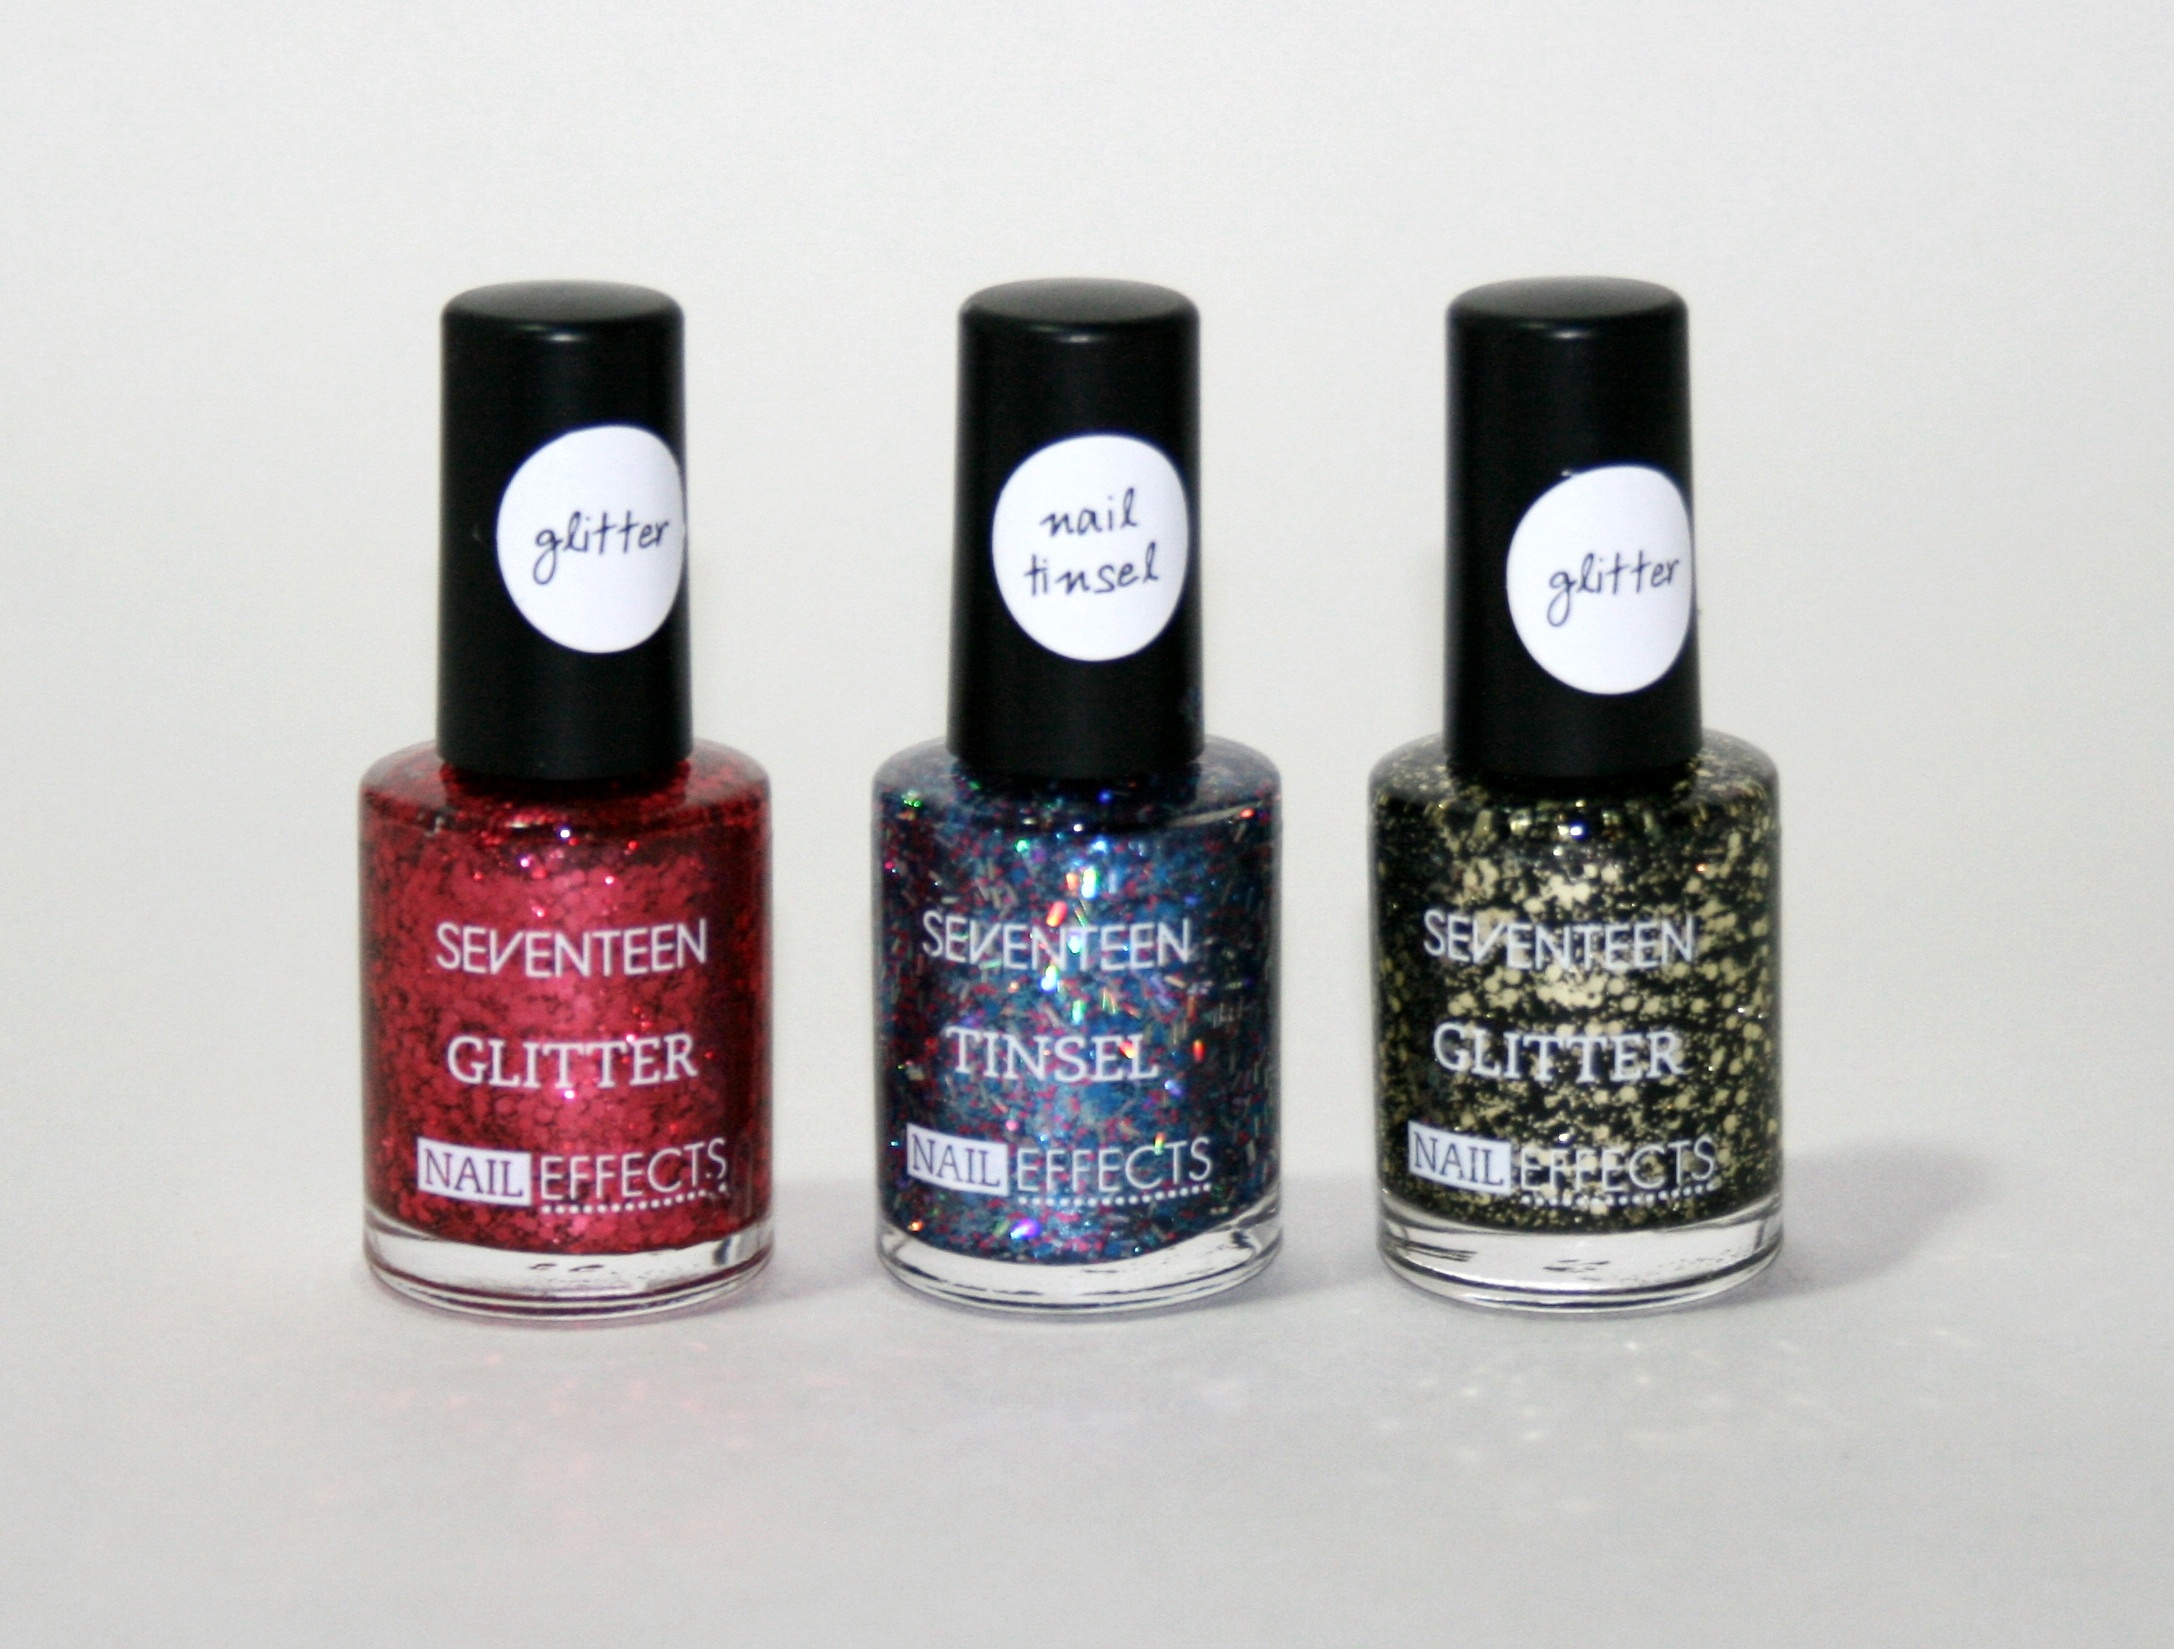 Boots Seventeen Nail Effects: Tinsel and Glitter